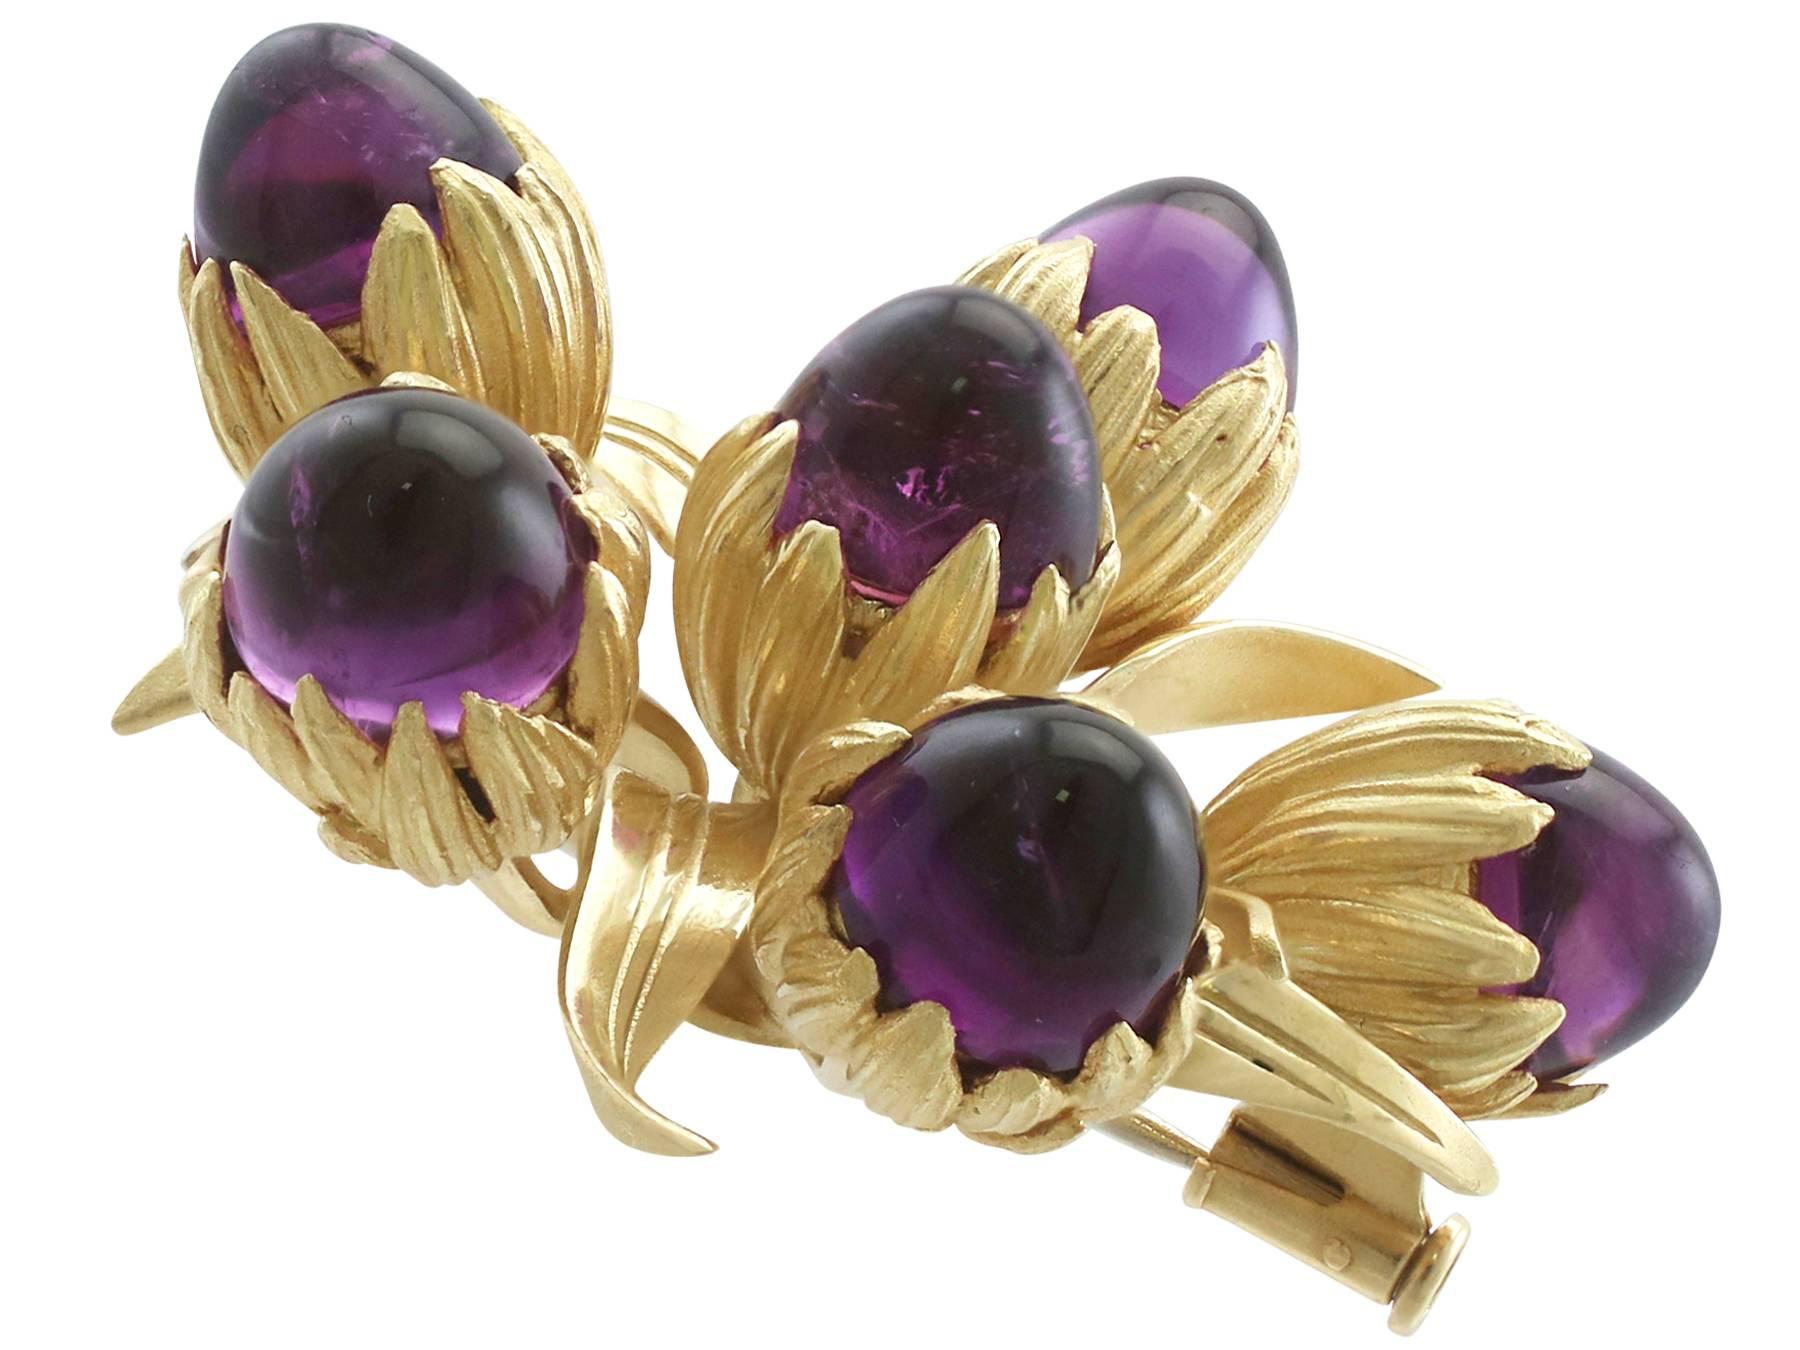 A stunning vintage 1960's 11.20 carat amethyst and 18 karat yellow gold floral brooch; part of our diverse gemstone jewelry and estate jewelry collections.

This stunning, fine and impressive amethyst brooch has been crafted in 18k yellow gold.

The